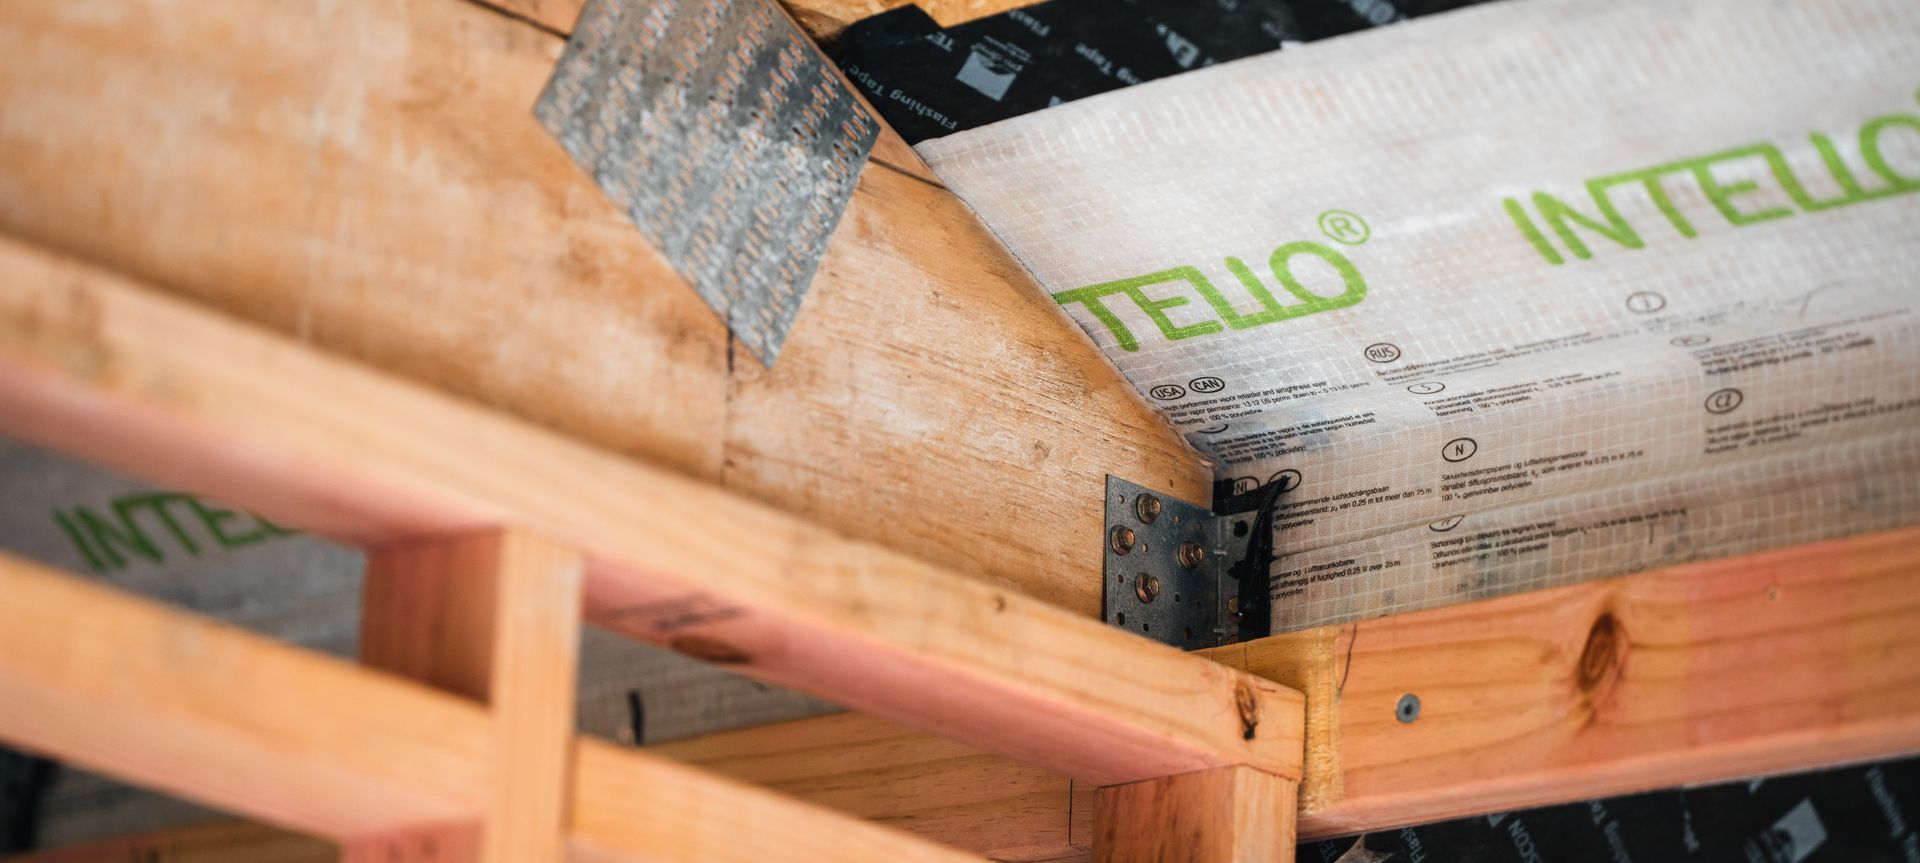 Pro Clima INTELLO PLUS provides a vapour control layer and an airtightness membrane to ensure protection against the elements